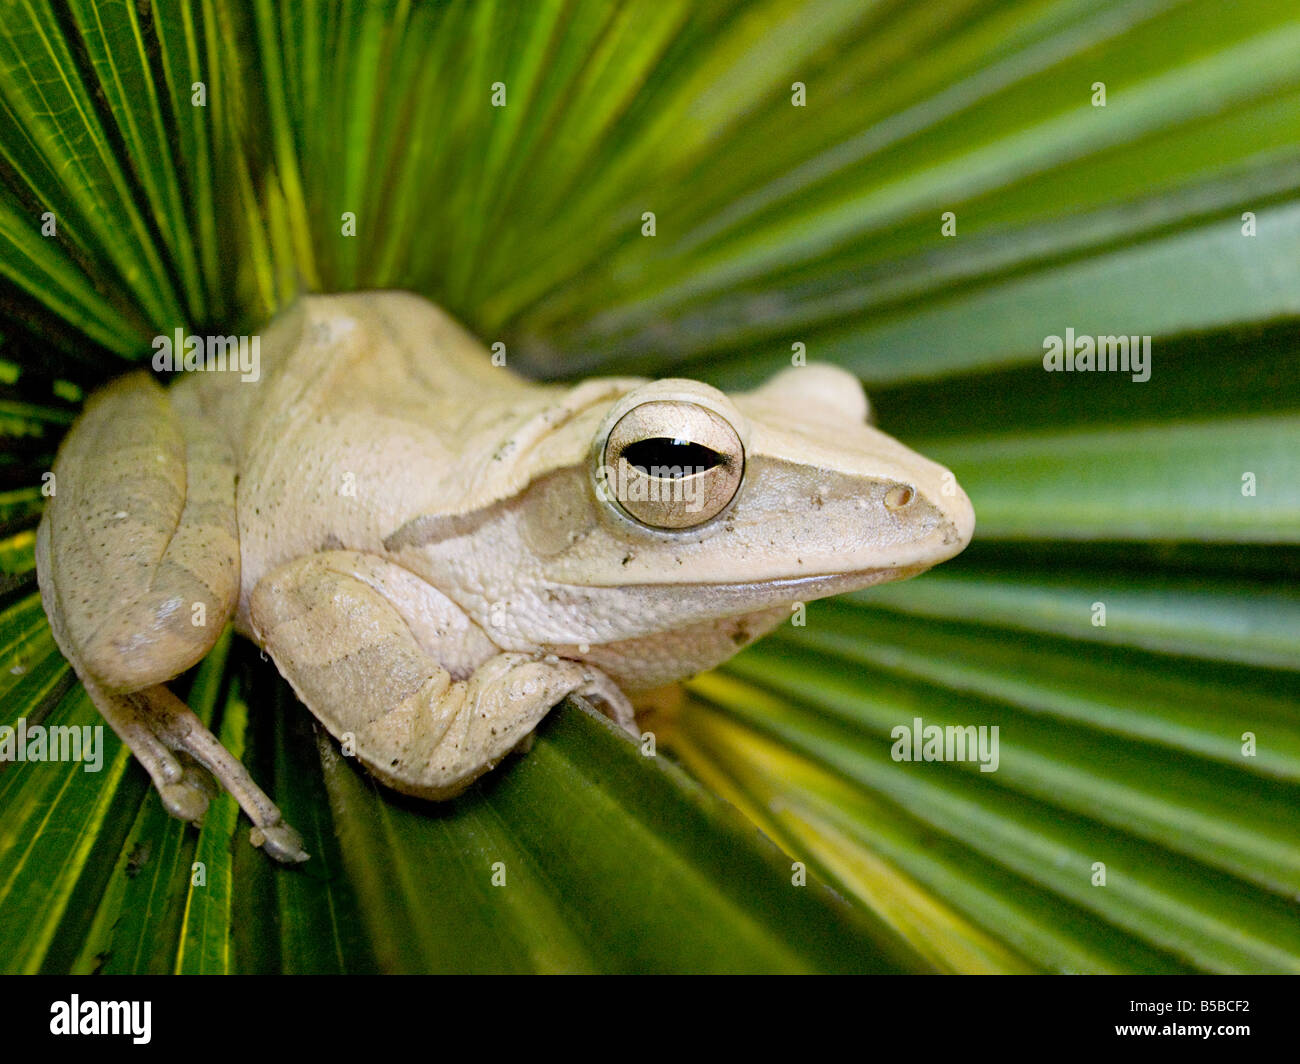 Close-up of tree frog, Vietnam, South East Asia Stock Photo